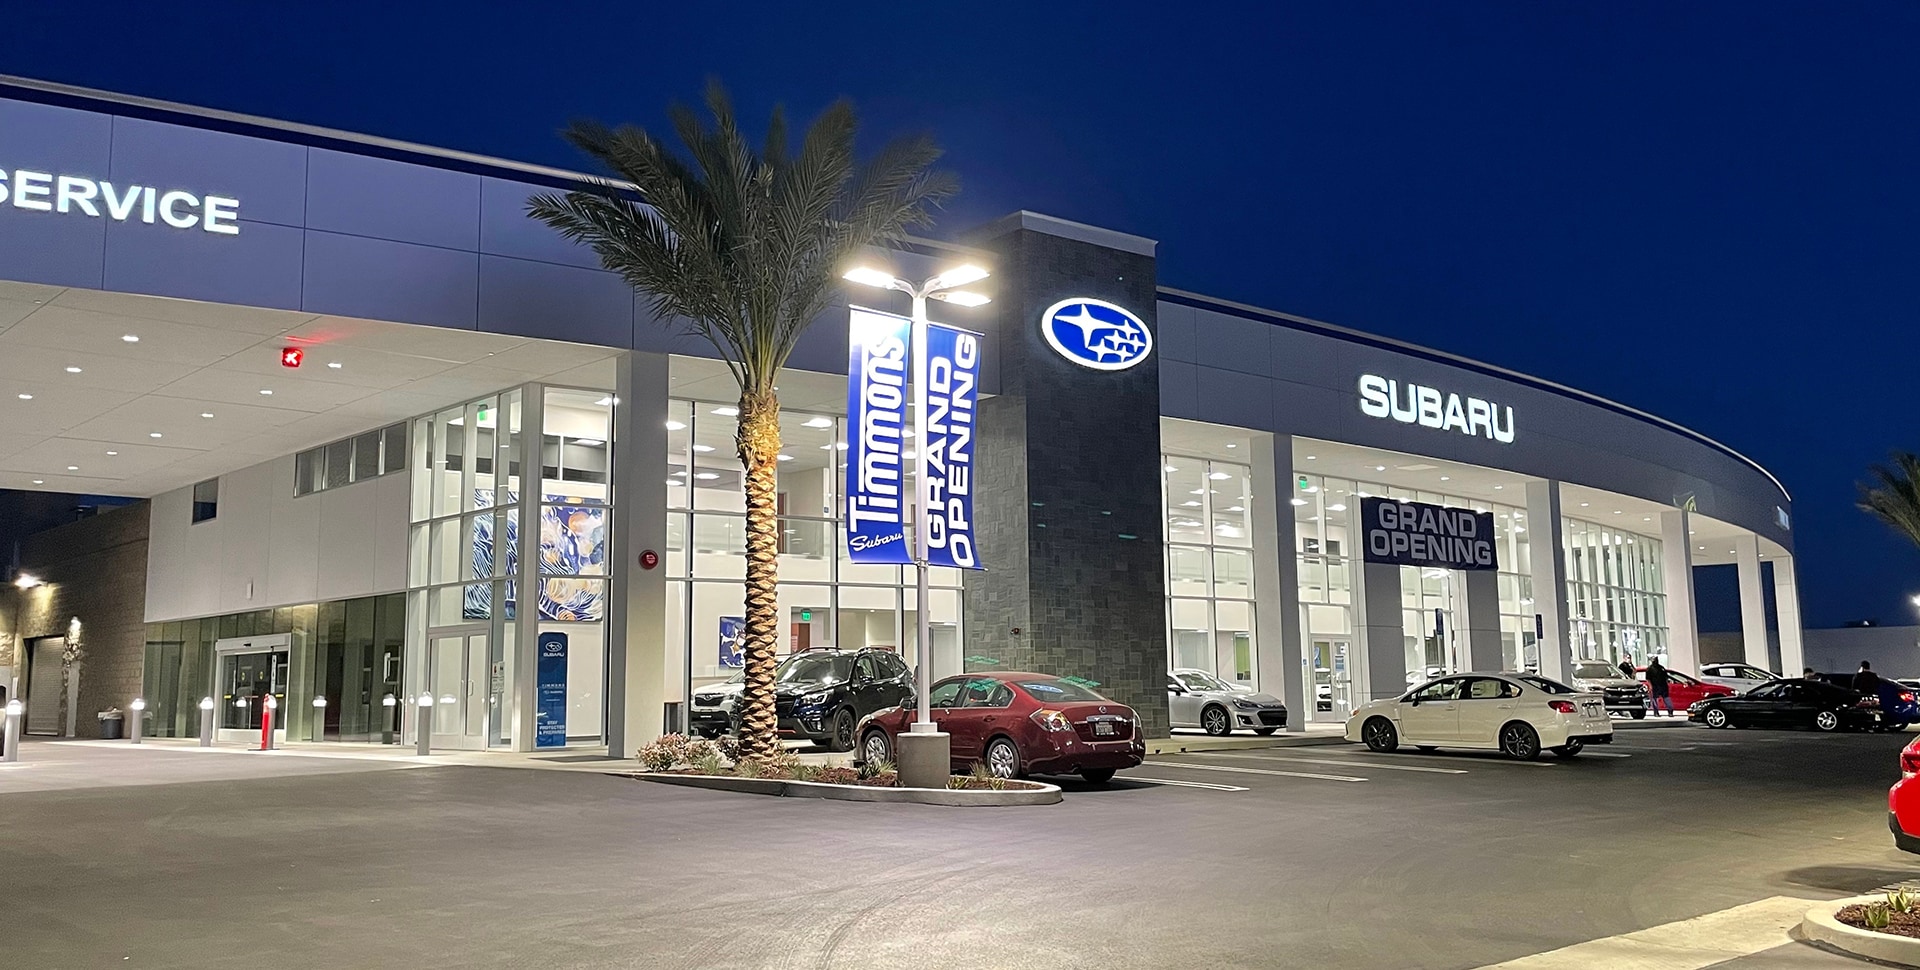 The Timmons Subaru team is excited for our new state of the art facility to be built in Long Beach!